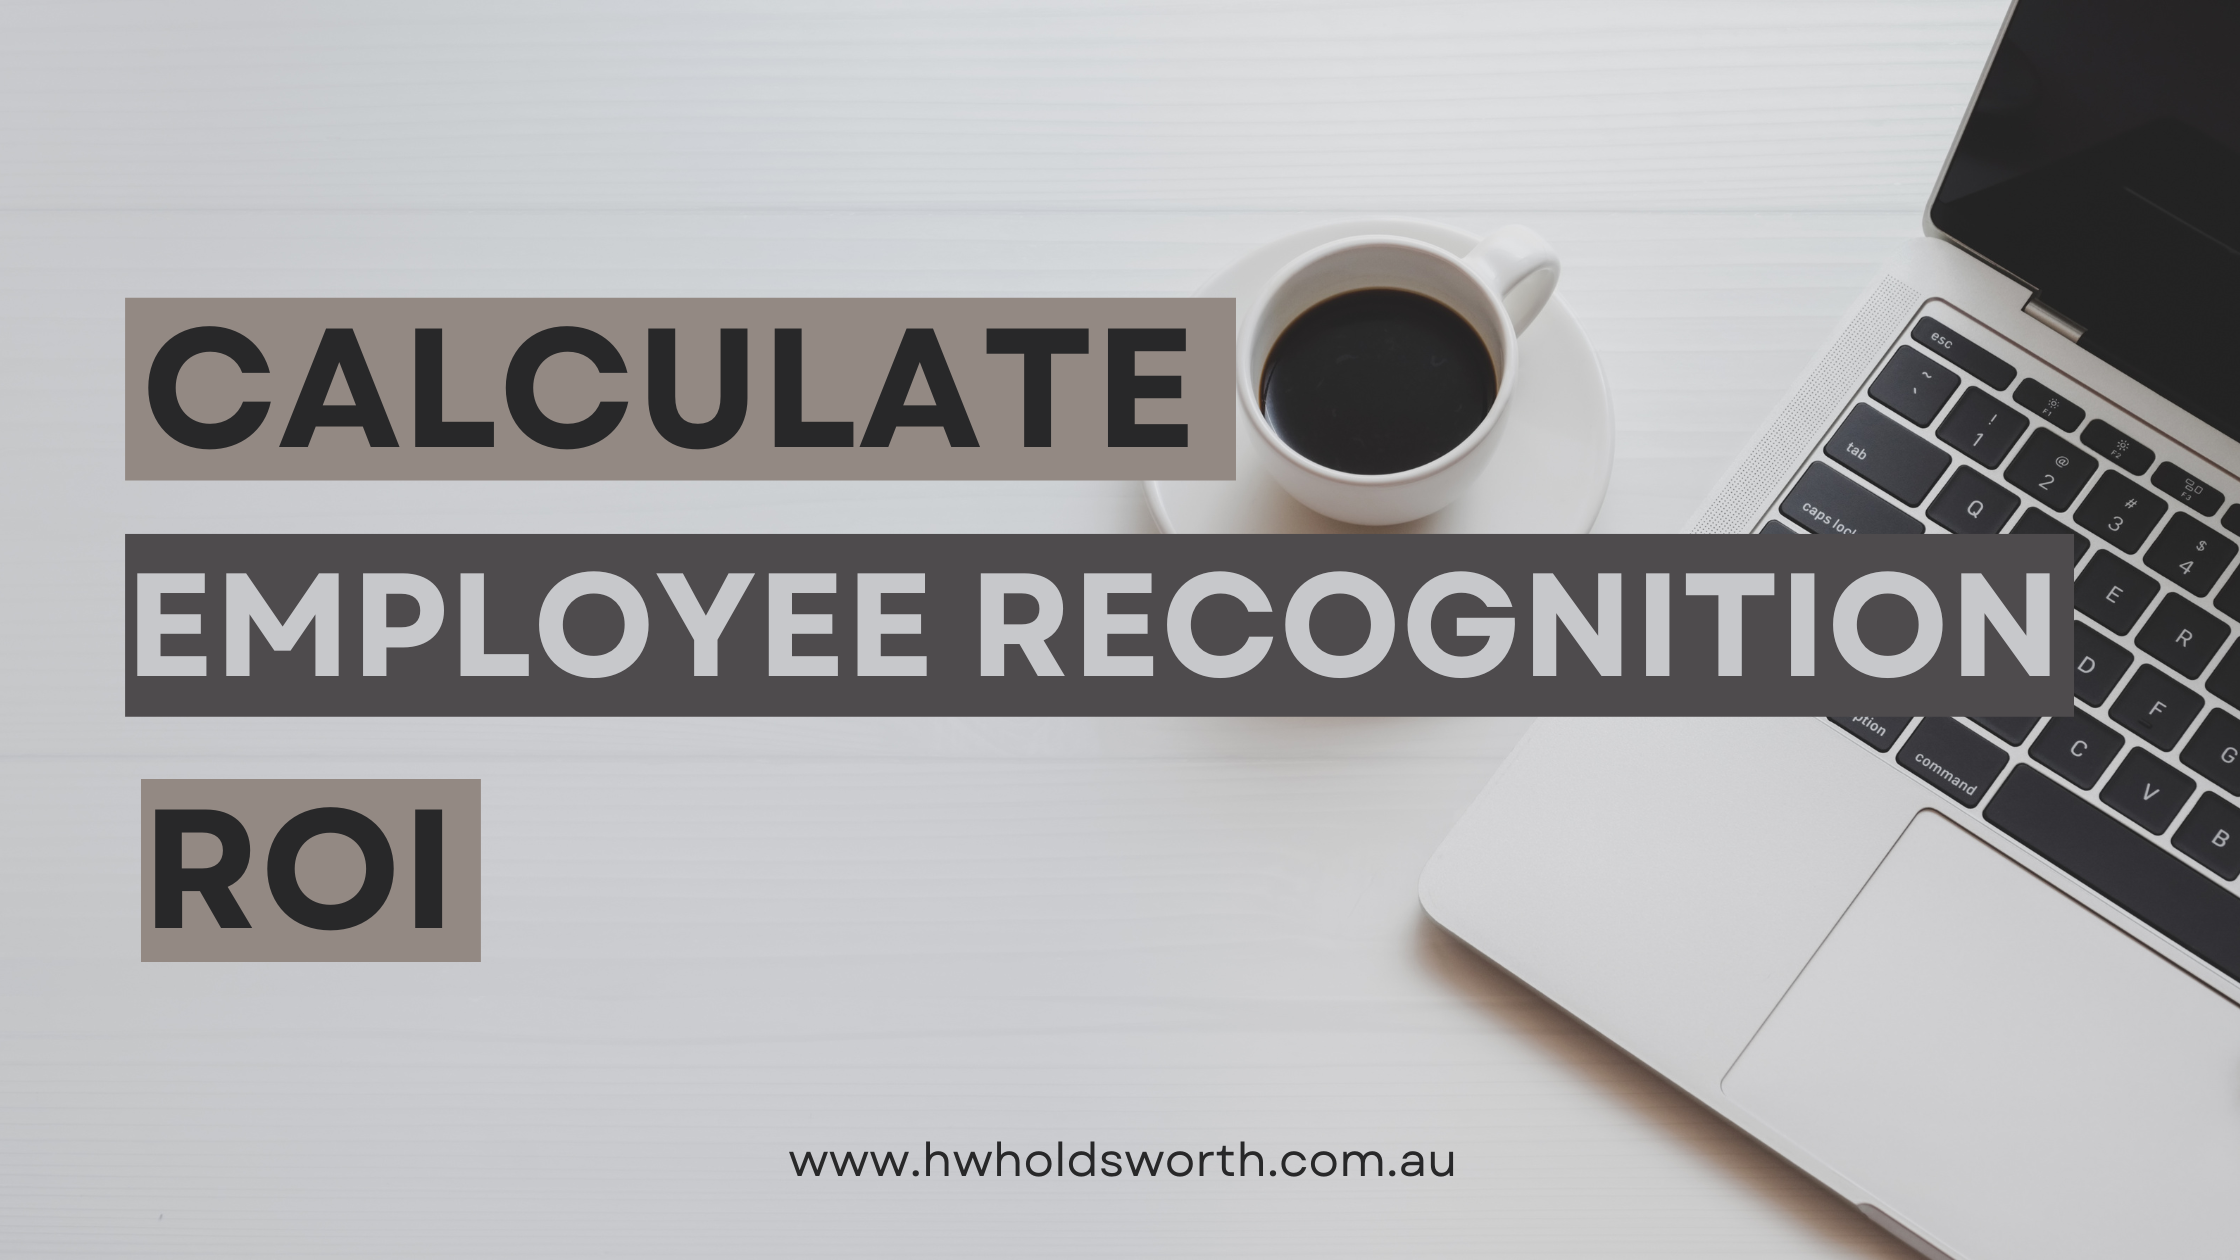 Calculate employee recognition return on investment